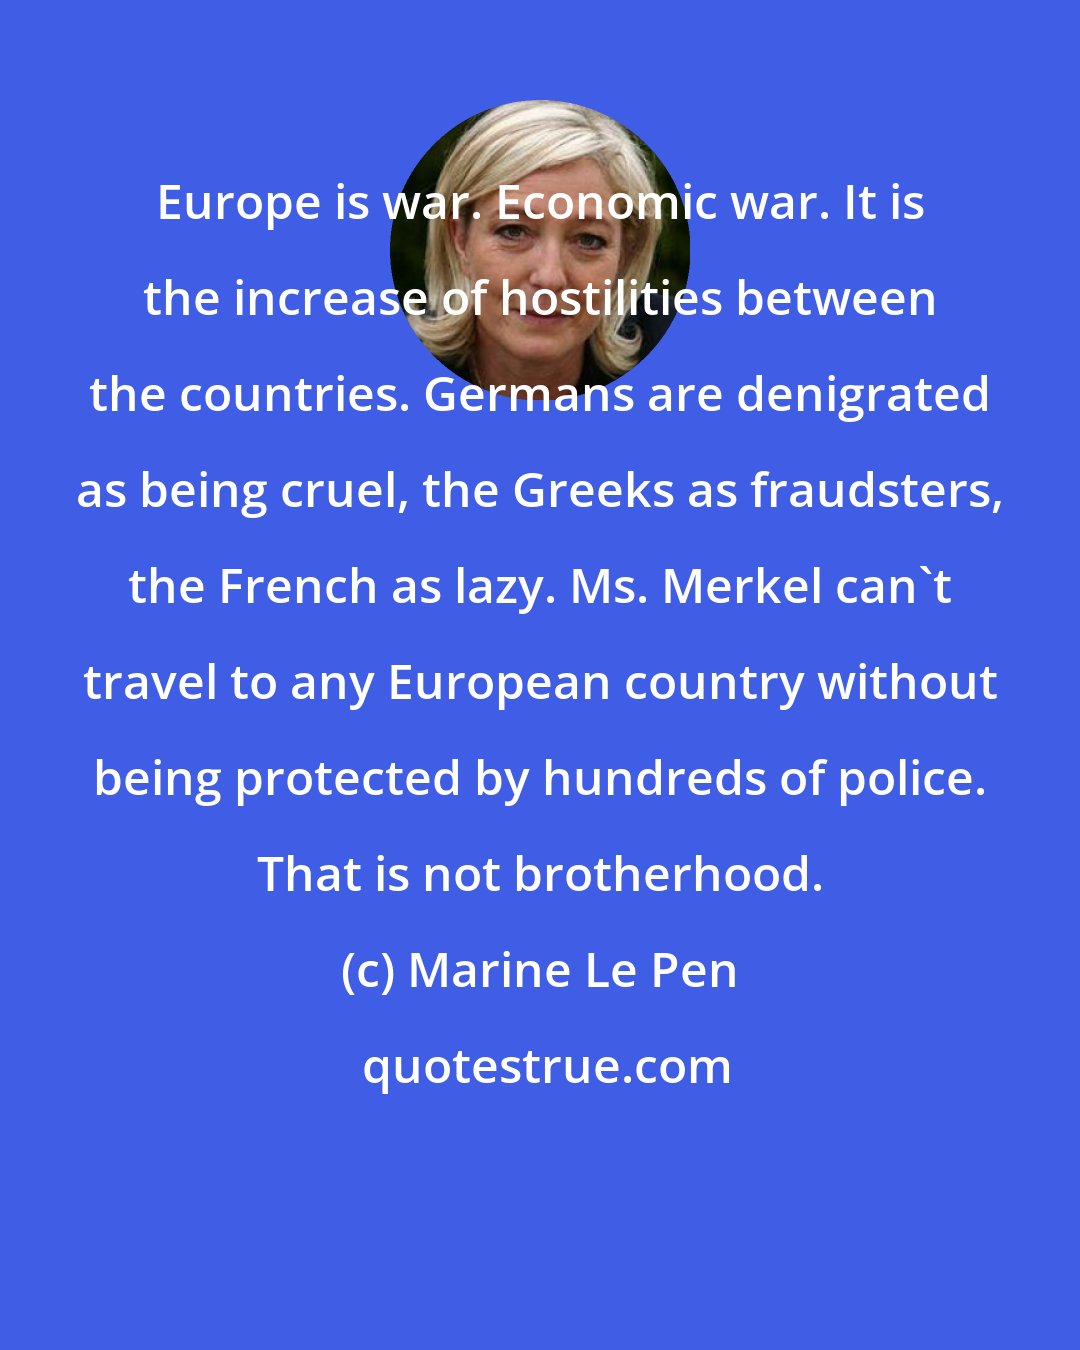 Marine Le Pen: Europe is war. Economic war. It is the increase of hostilities between the countries. Germans are denigrated as being cruel, the Greeks as fraudsters, the French as lazy. Ms. Merkel can't travel to any European country without being protected by hundreds of police. That is not brotherhood.